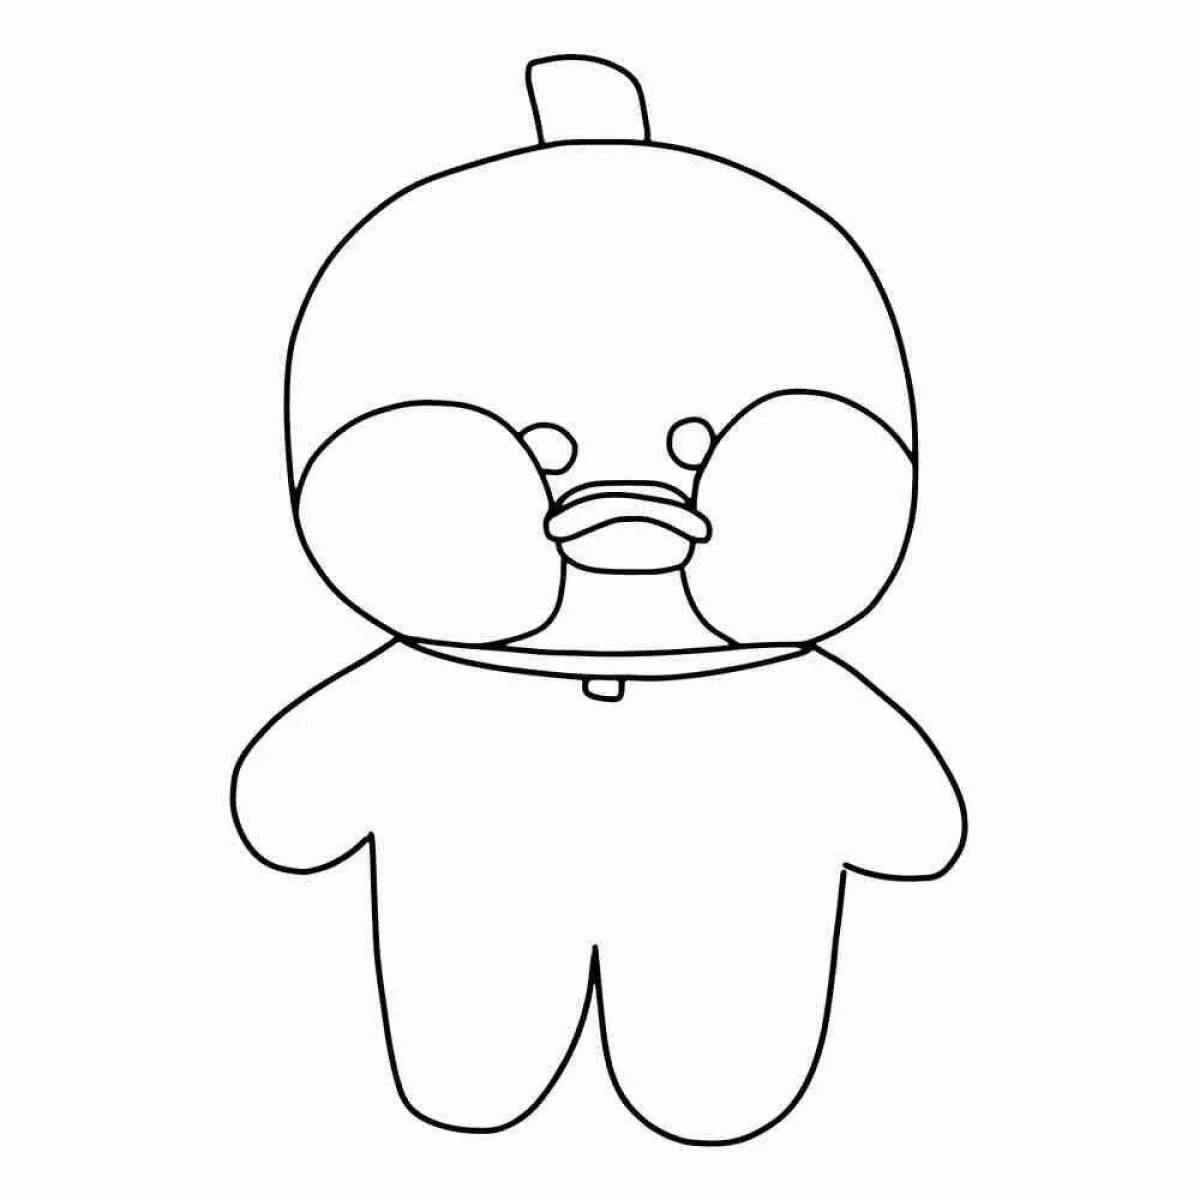 Coloring page lalafanfan duck